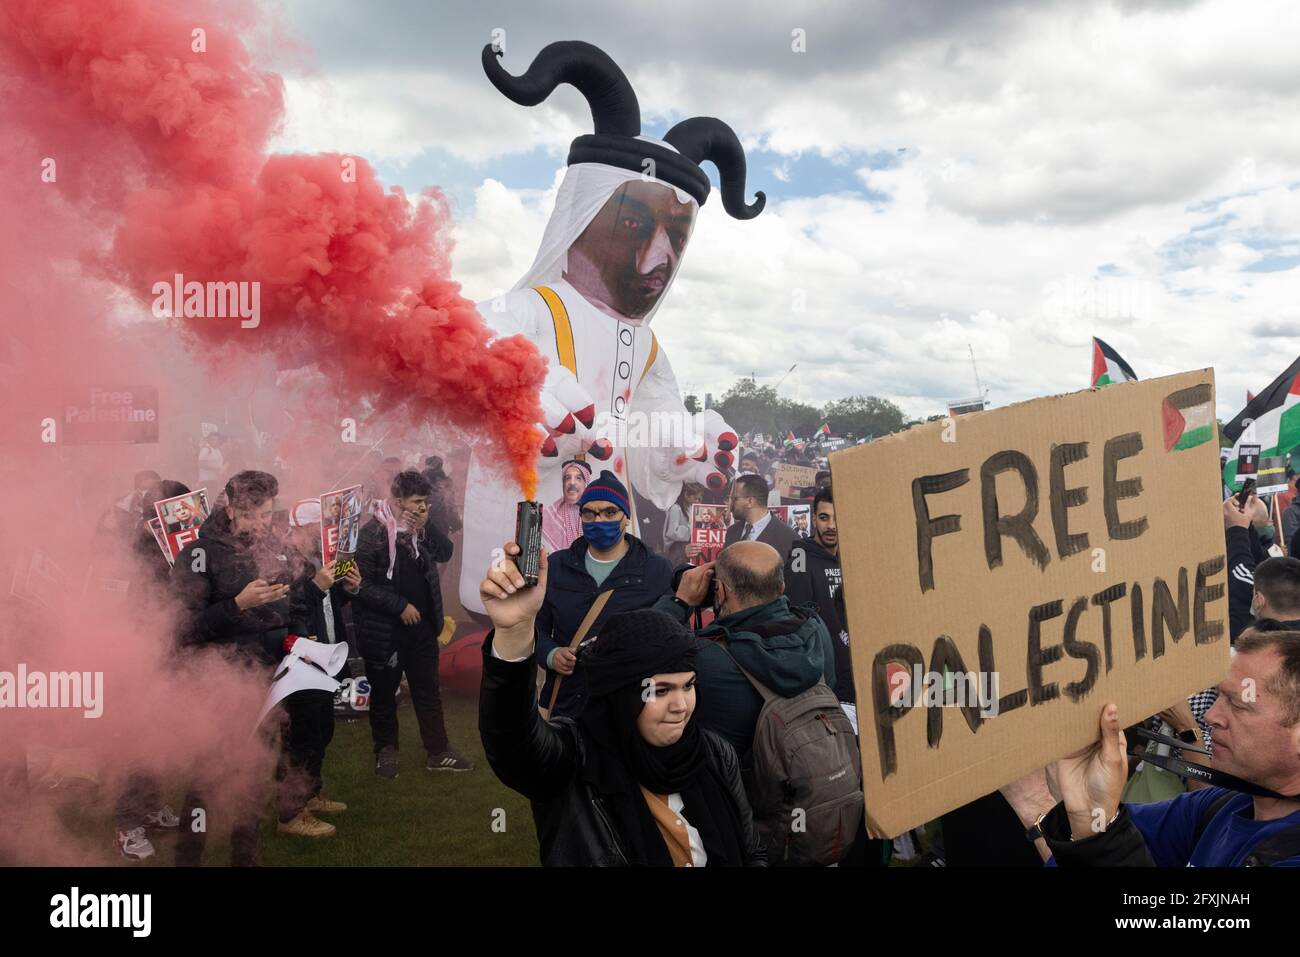 Crowd of protesters with smoke bombs and inflatable demonic figure, Free Palestine Protest, Hyde Park, London, 22 May 2021 Stock Photo